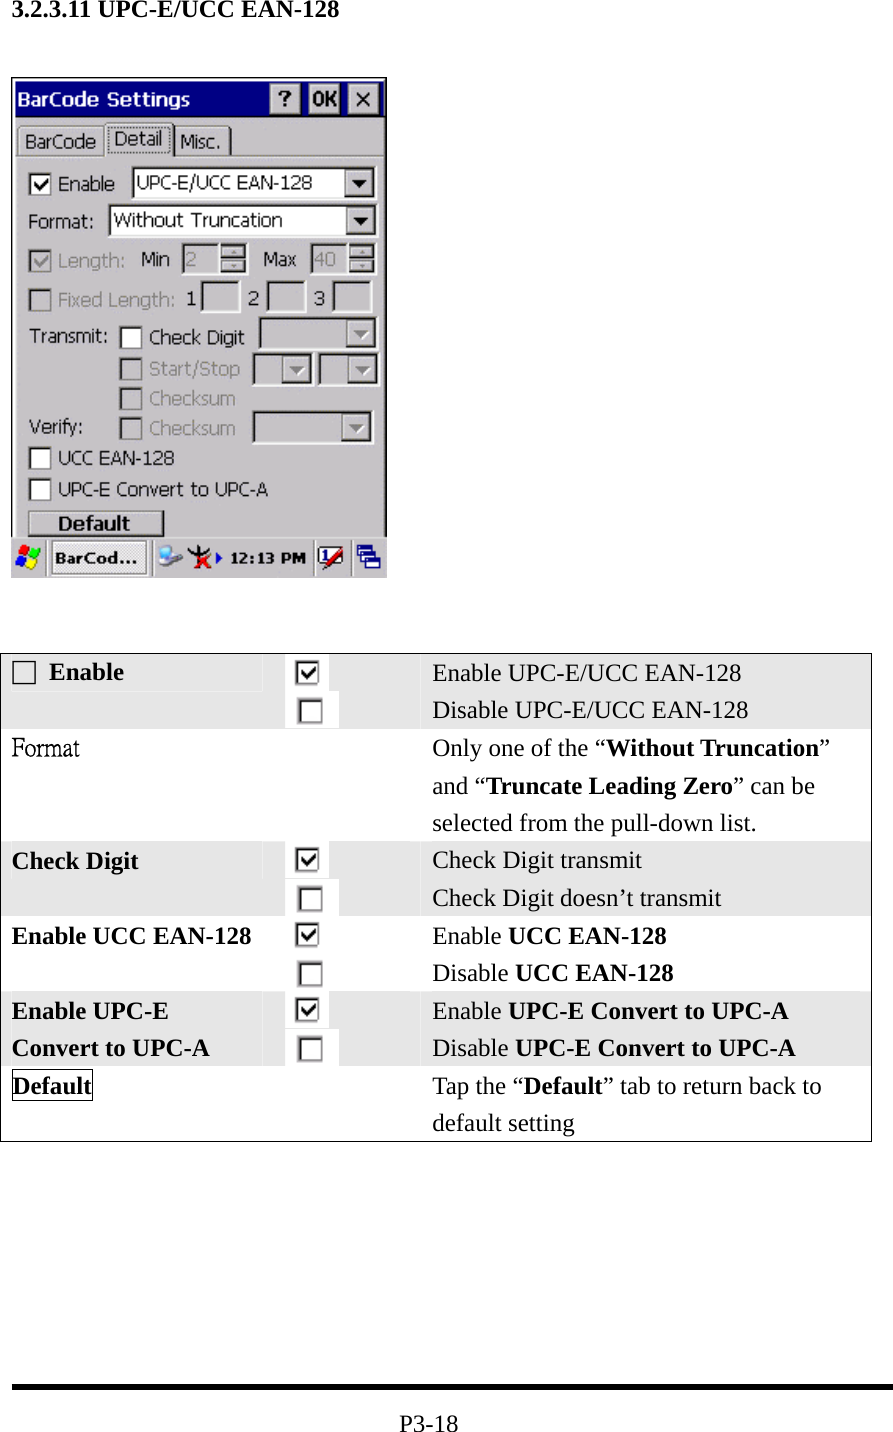 3.2.3.11 UPC-E/UCC EAN-128           P3-18 □ Enable   Enable UPC-E/UCC EAN-128 Disable UPC-E/UCC EAN-128 Format  Only one of the “Without Truncation” and “Truncate Leading Zero” can be selected from the pull-down list. Check Digit    Check Digit transmit Check Digit doesn’t transmit Enable UCC EAN-128    Enable UCC EAN-128 Disable UCC EAN-128 Enable UPC-E Convert to UPC-A    Enable UPC-E Convert to UPC-A  Disable UPC-E Convert to UPC-A Default   Tap the “Default” tab to return back to default setting 